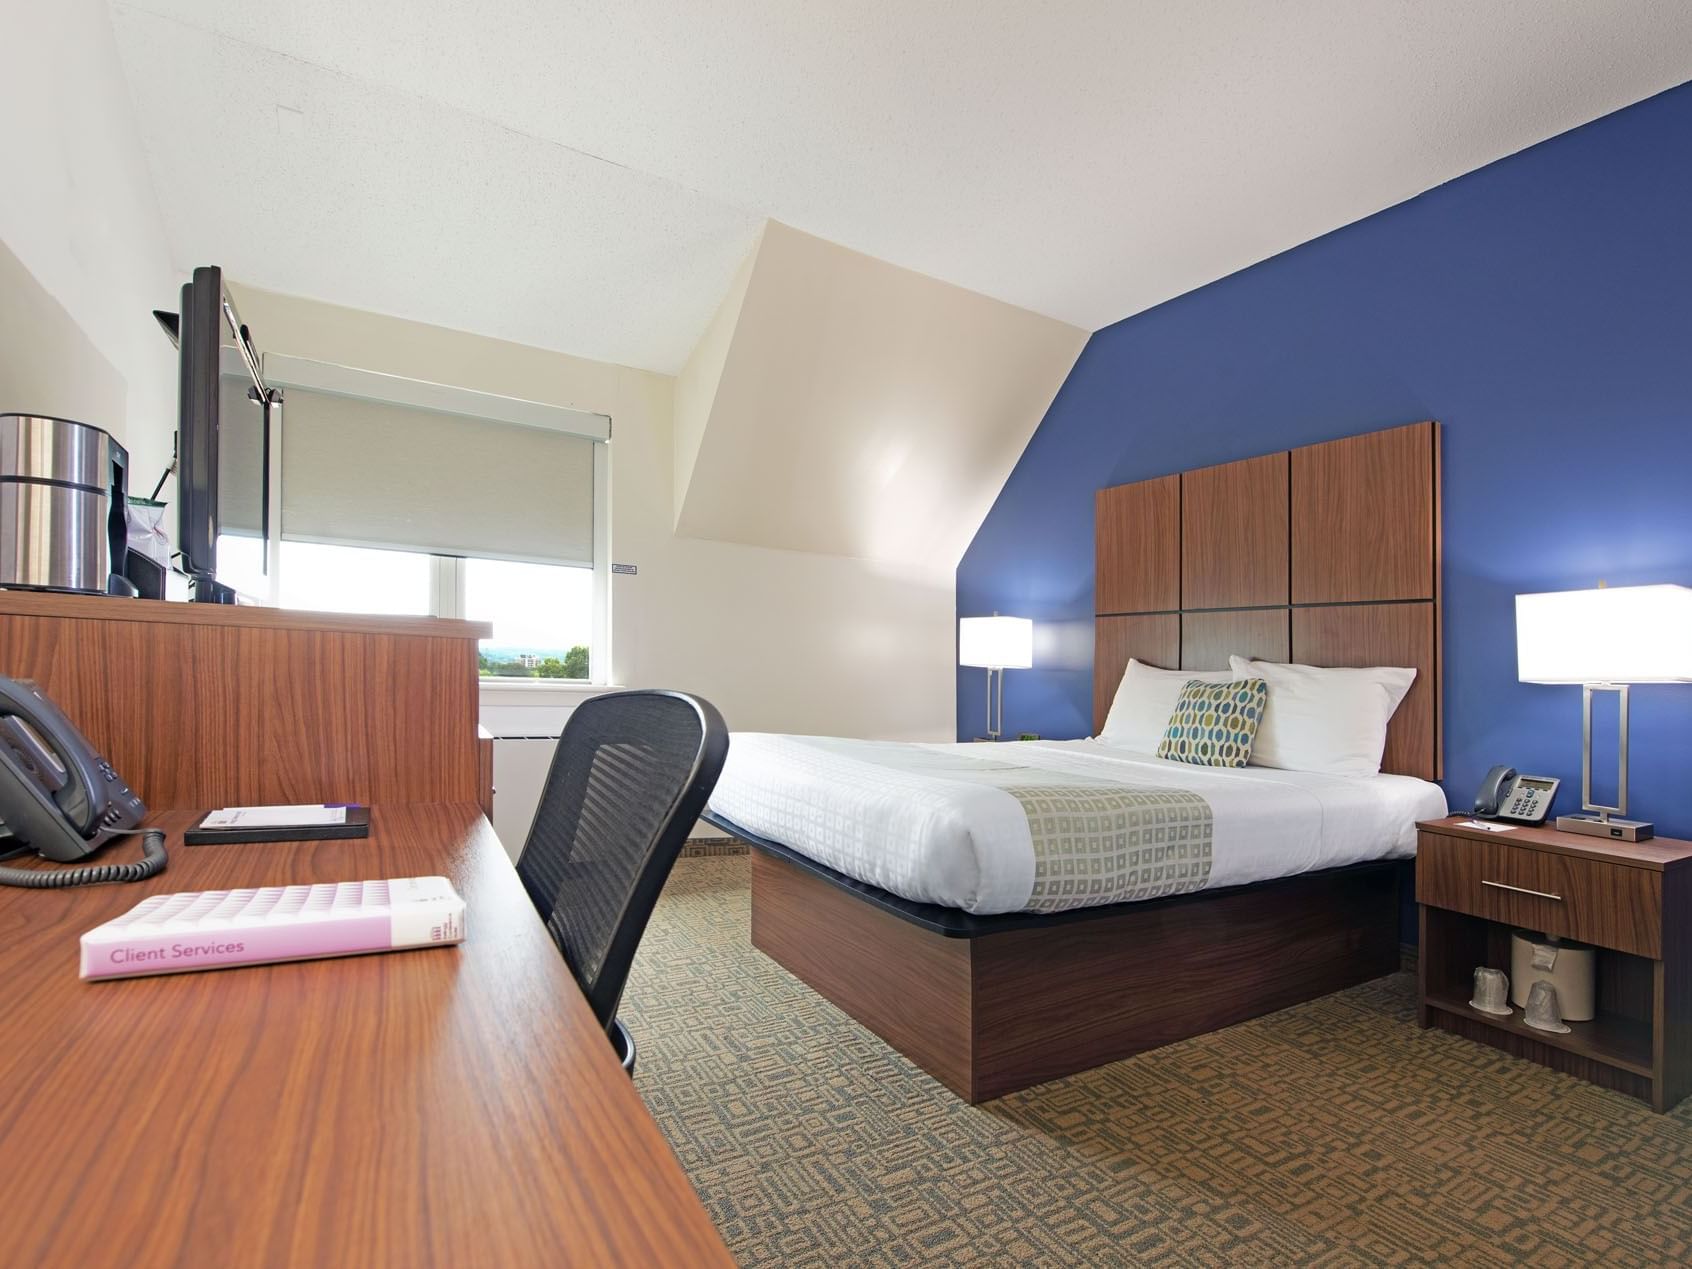 Standard Single Queen bedroom at Kellogg Conference Center